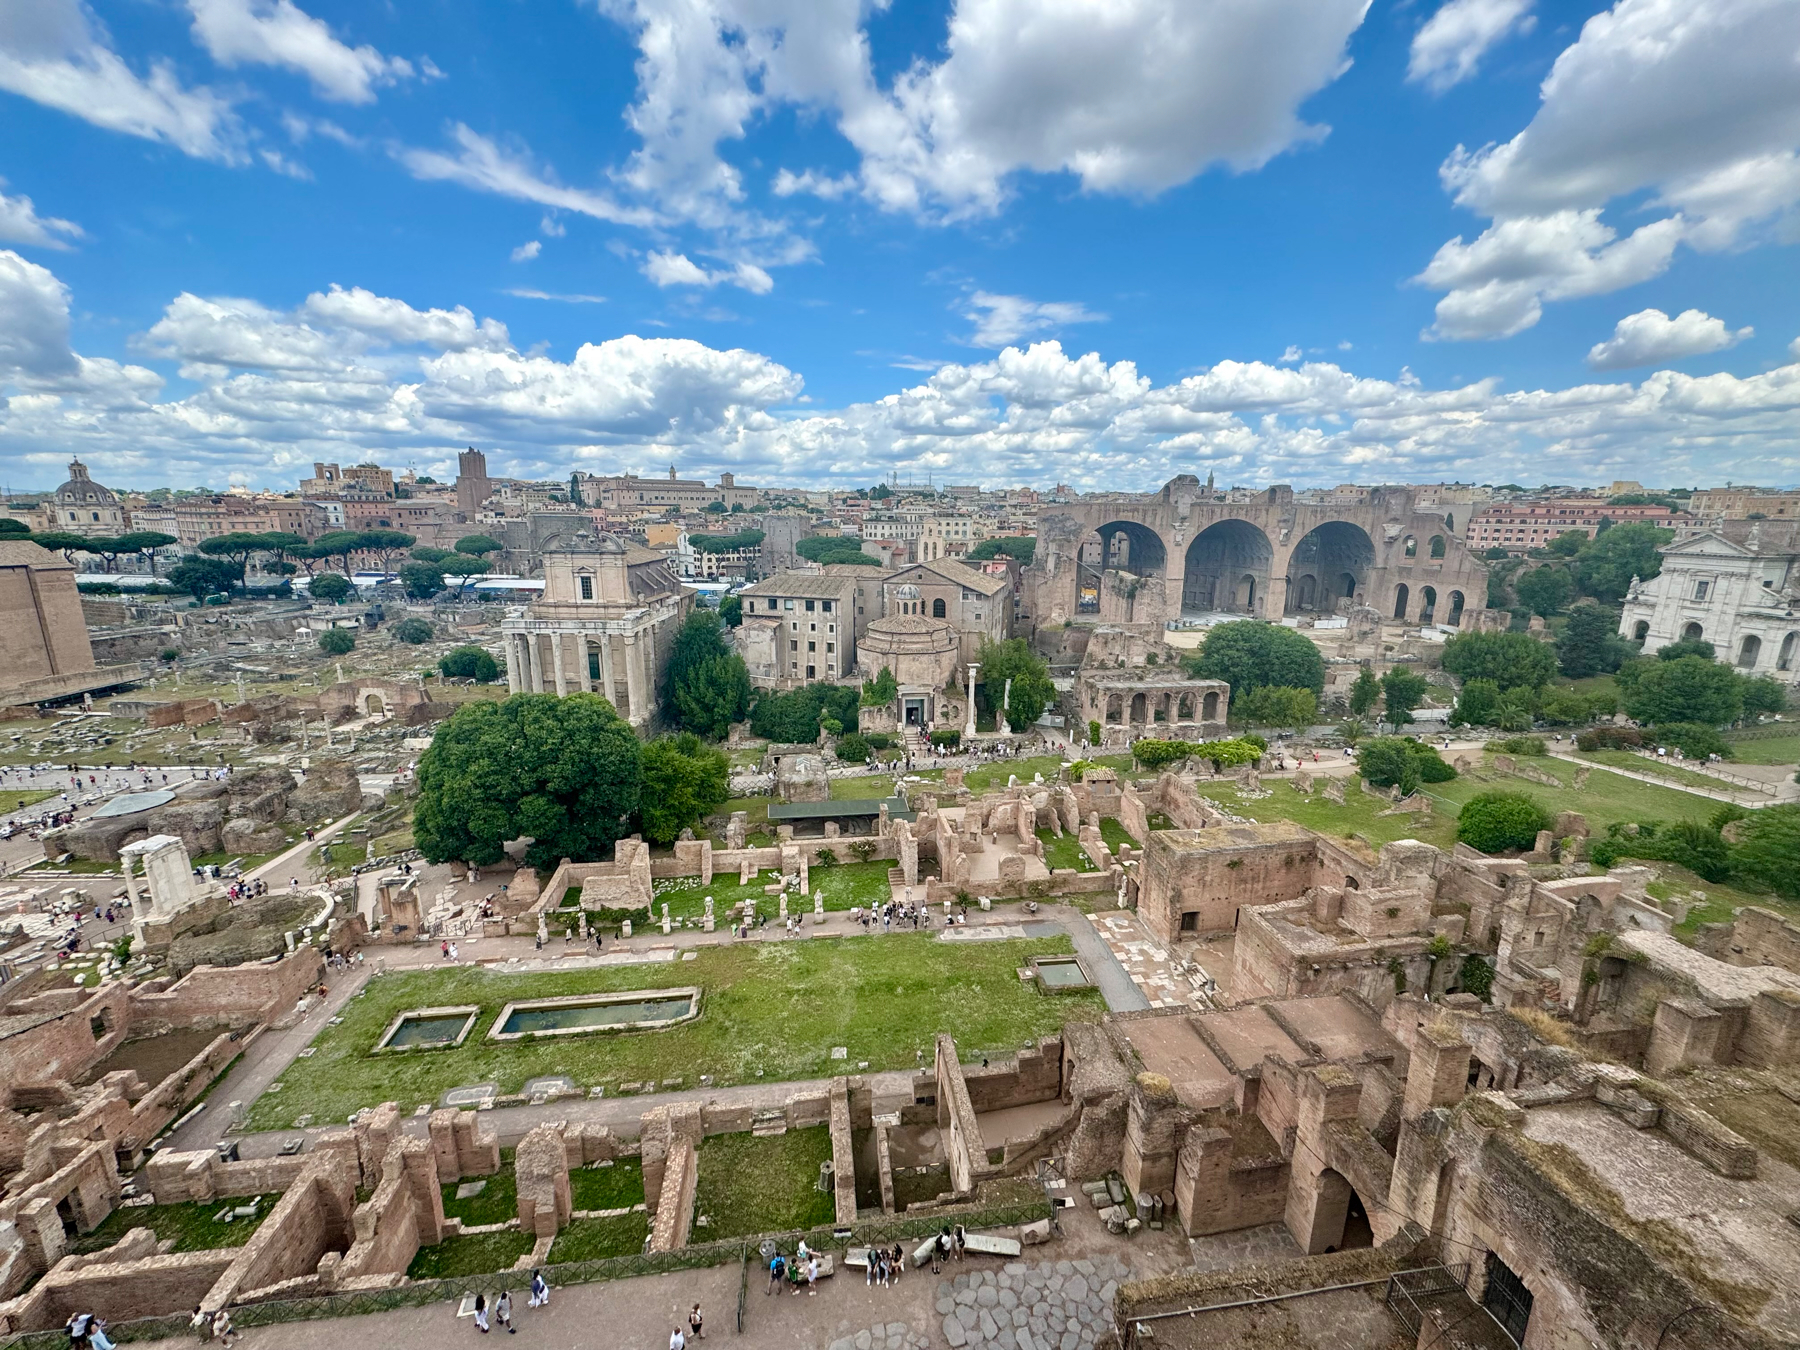 Panoramic view of the Roman Forum in Rome, Italy, showcasing ancient ruins including temples, columns, and stone structures. The vast archaeological site is dotted with greenery and visitors exploring. The background features more historic buildings and arches set against a blue sky.